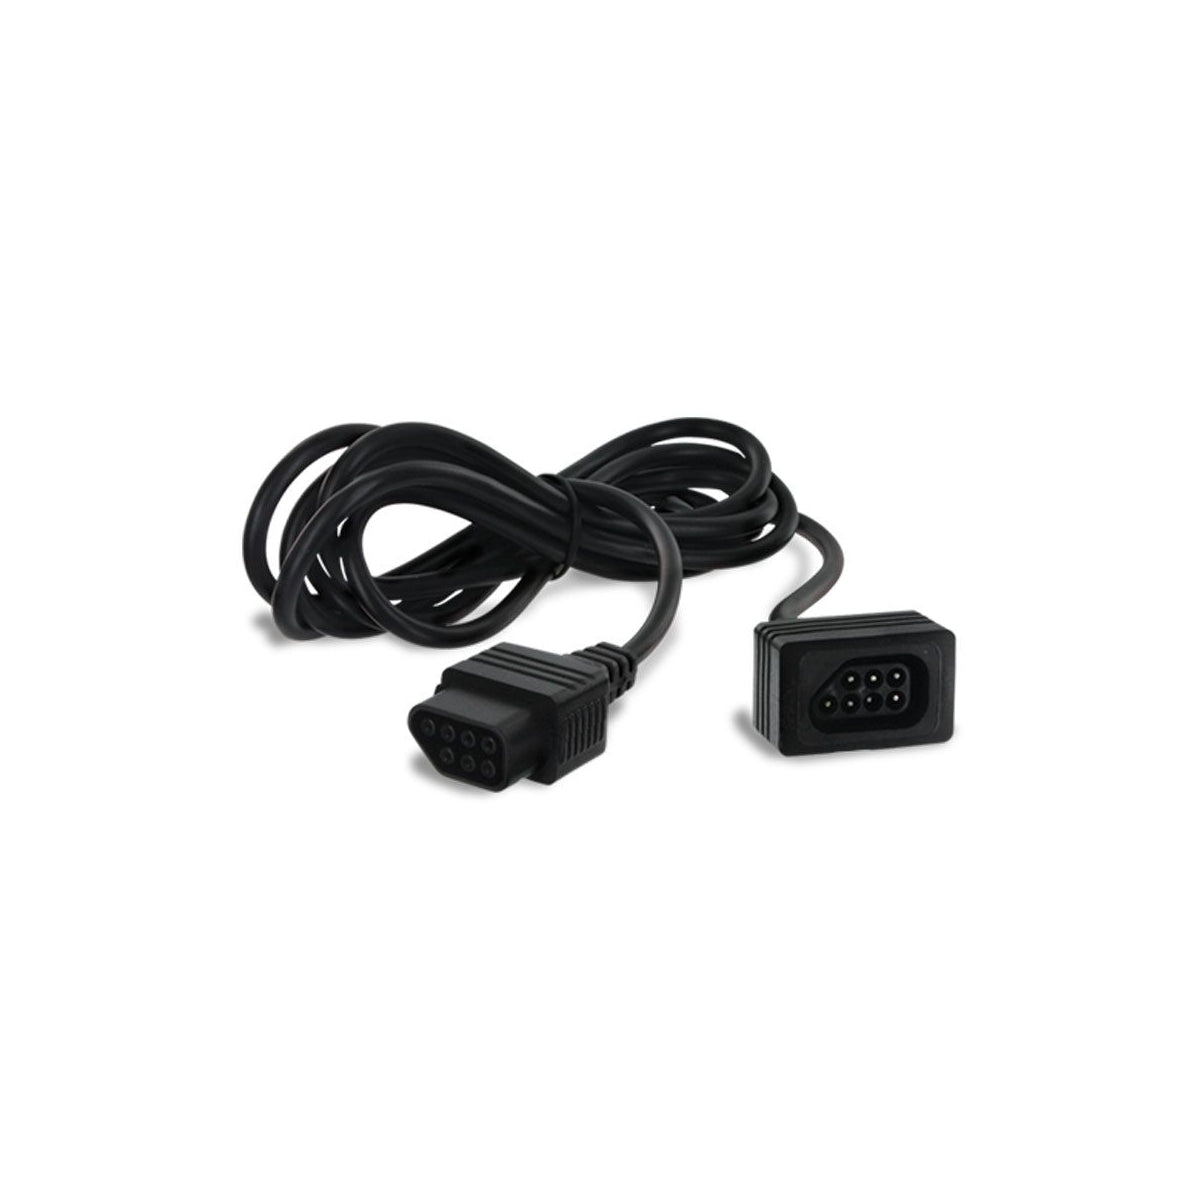 Tomee Controller Extension Cable - (NES) Nintendo Entertainment System Accessories Tomee   